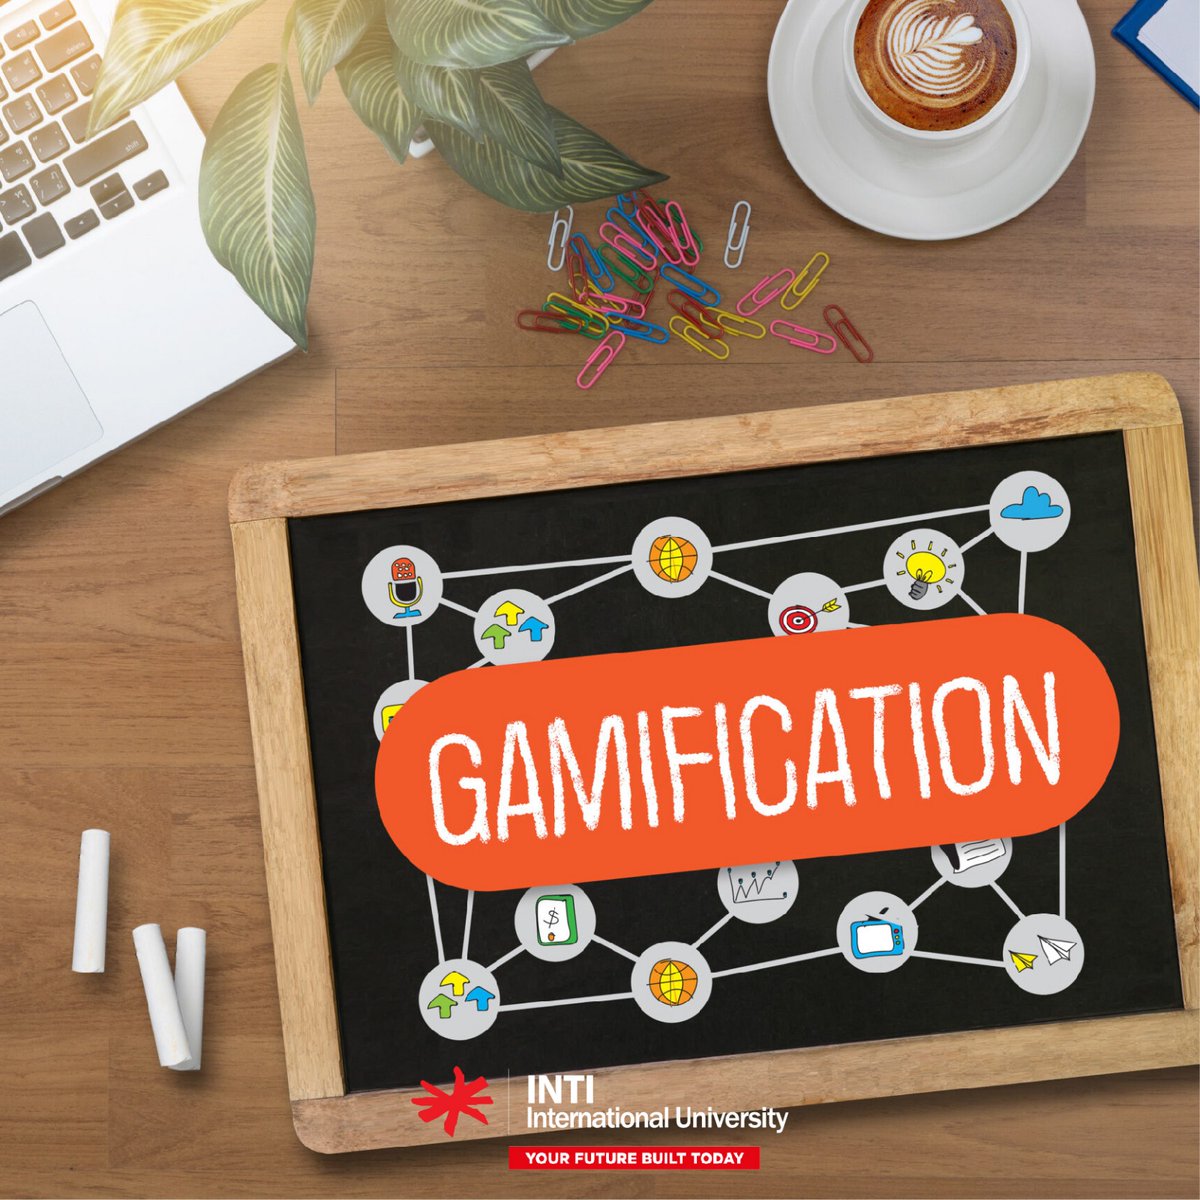 Expand your knowledge by reading the journal article regarding gamification published by our academics here!
Read here: eprints.intimal.edu.my/1610/

#INTI360 #INTIIU #academicpublishing #scholarlywork #knowledgeispower